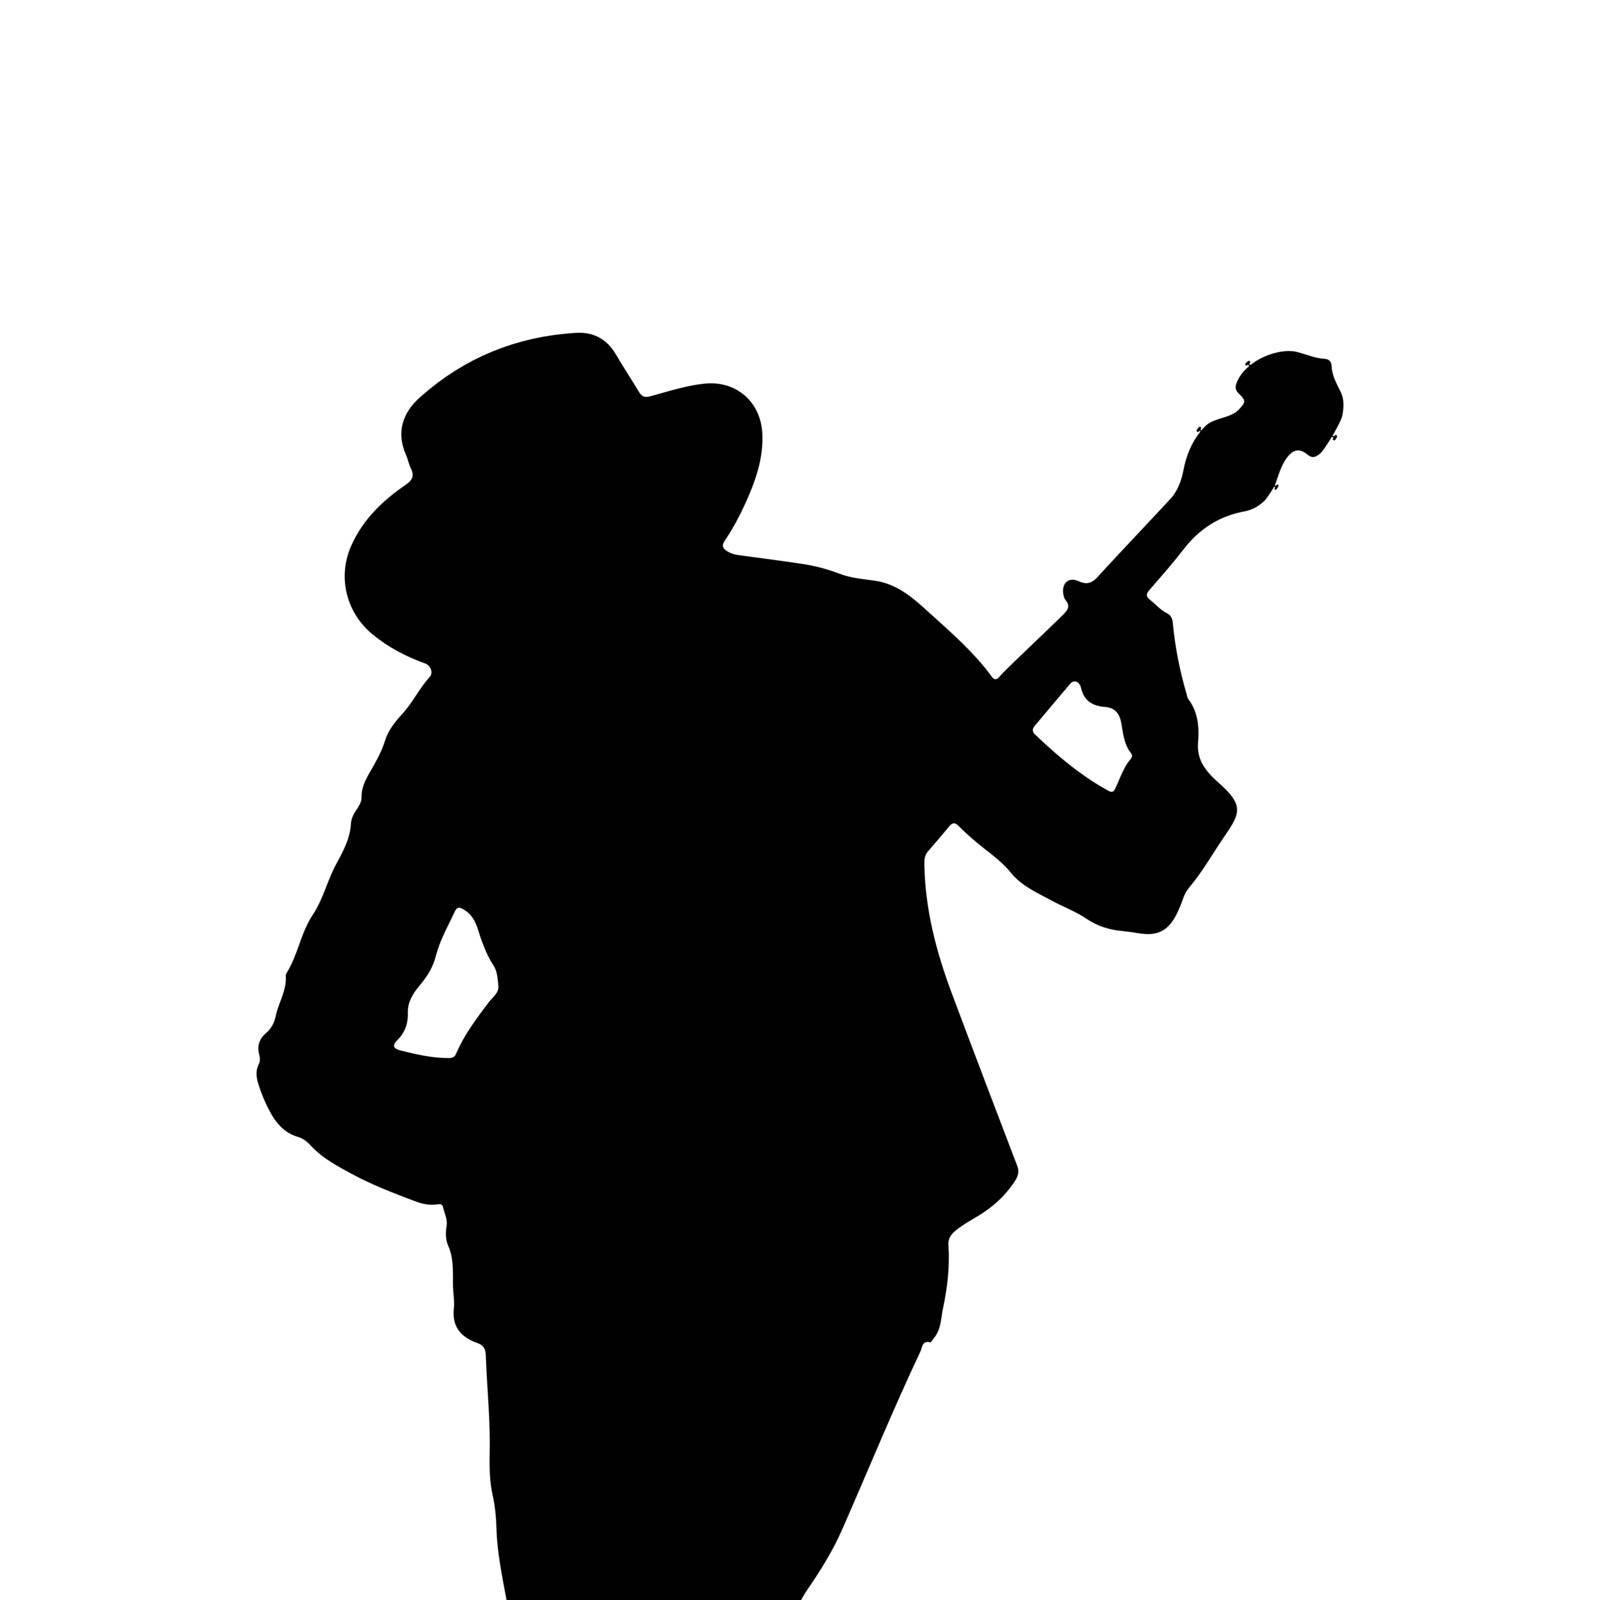 Silhouette of a man in a hat with a guitar. Flat design